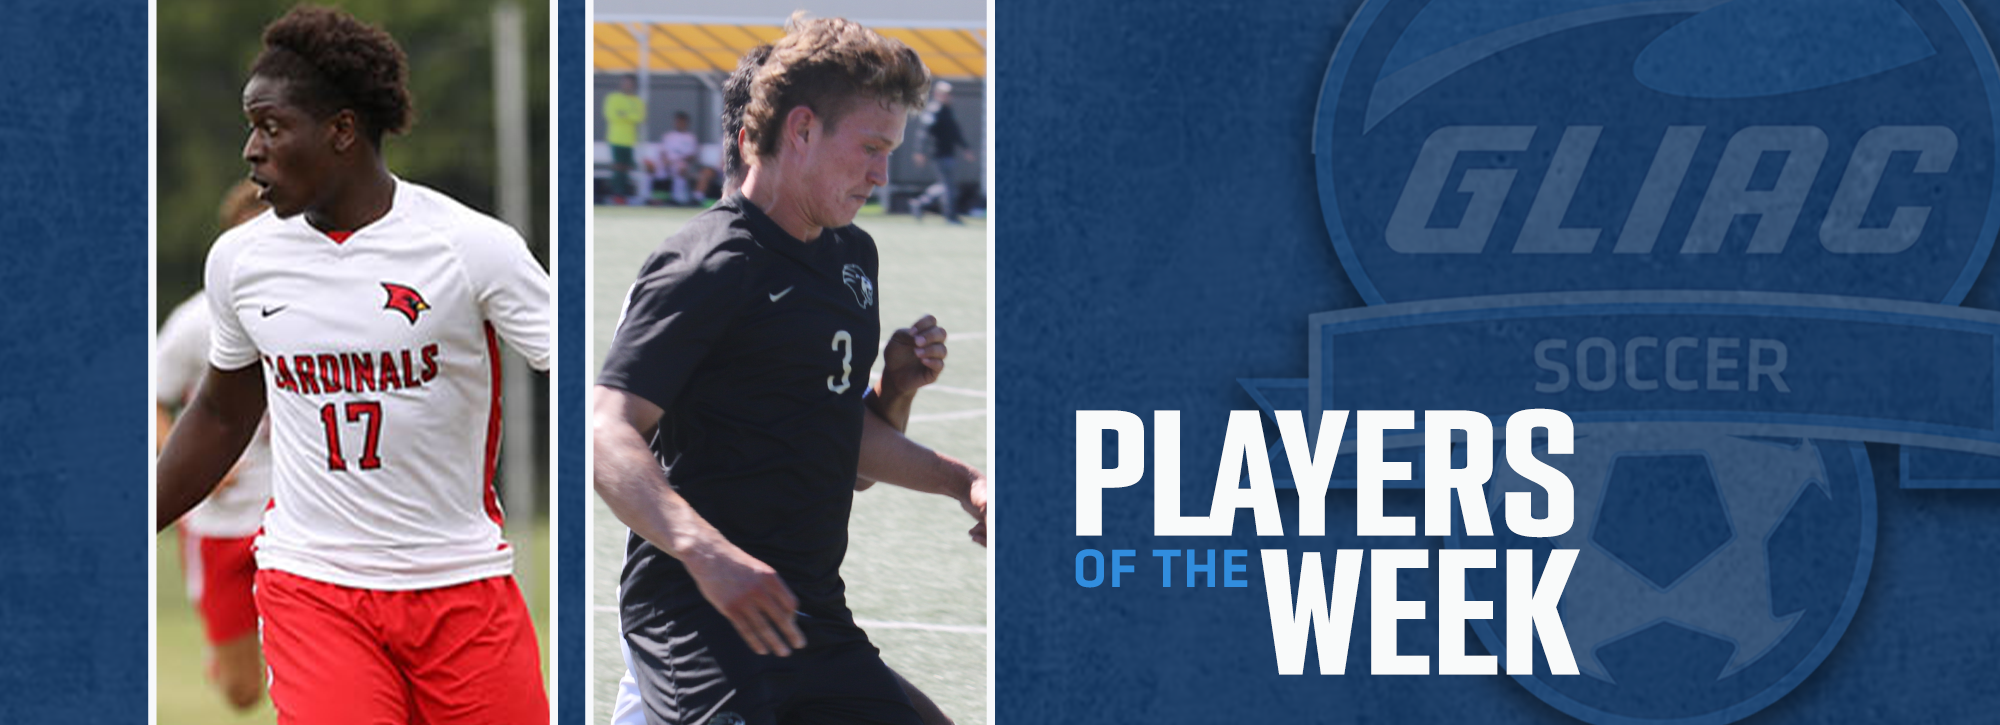 SVSU's Monney and PNW's Hooper honored with men's soccer player of the week awards